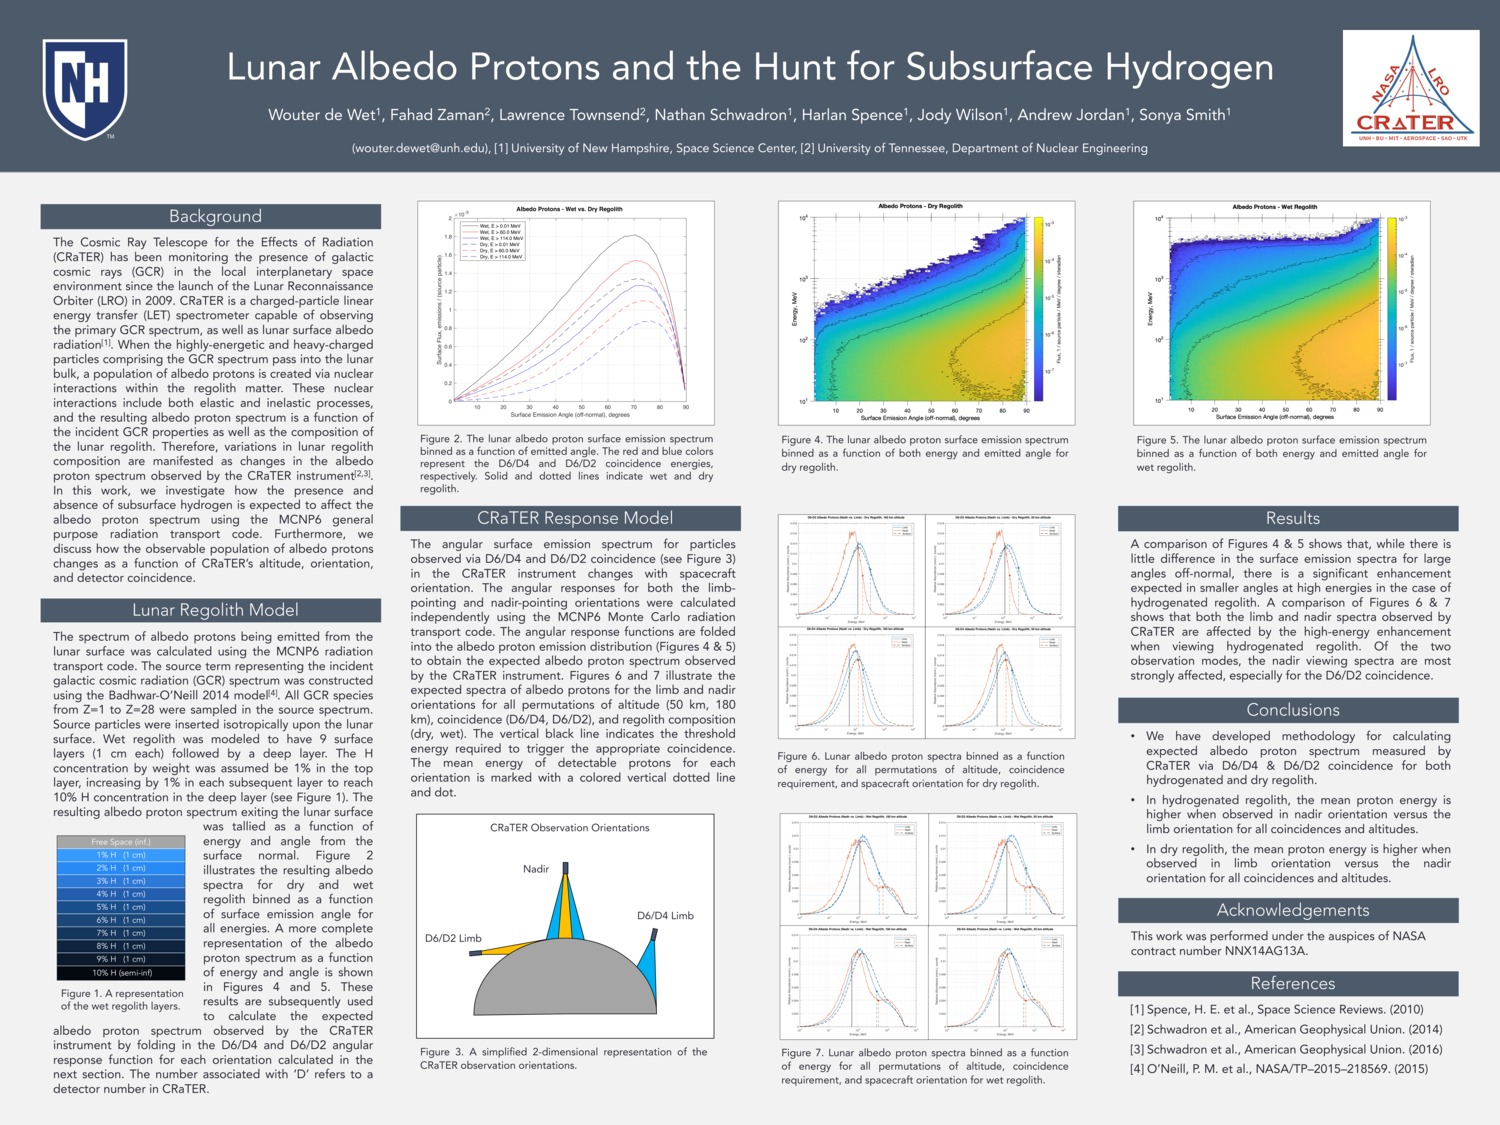 Lunar Albedo Protons And The Hunt For Subsurface Hydrogen by wouterdewet